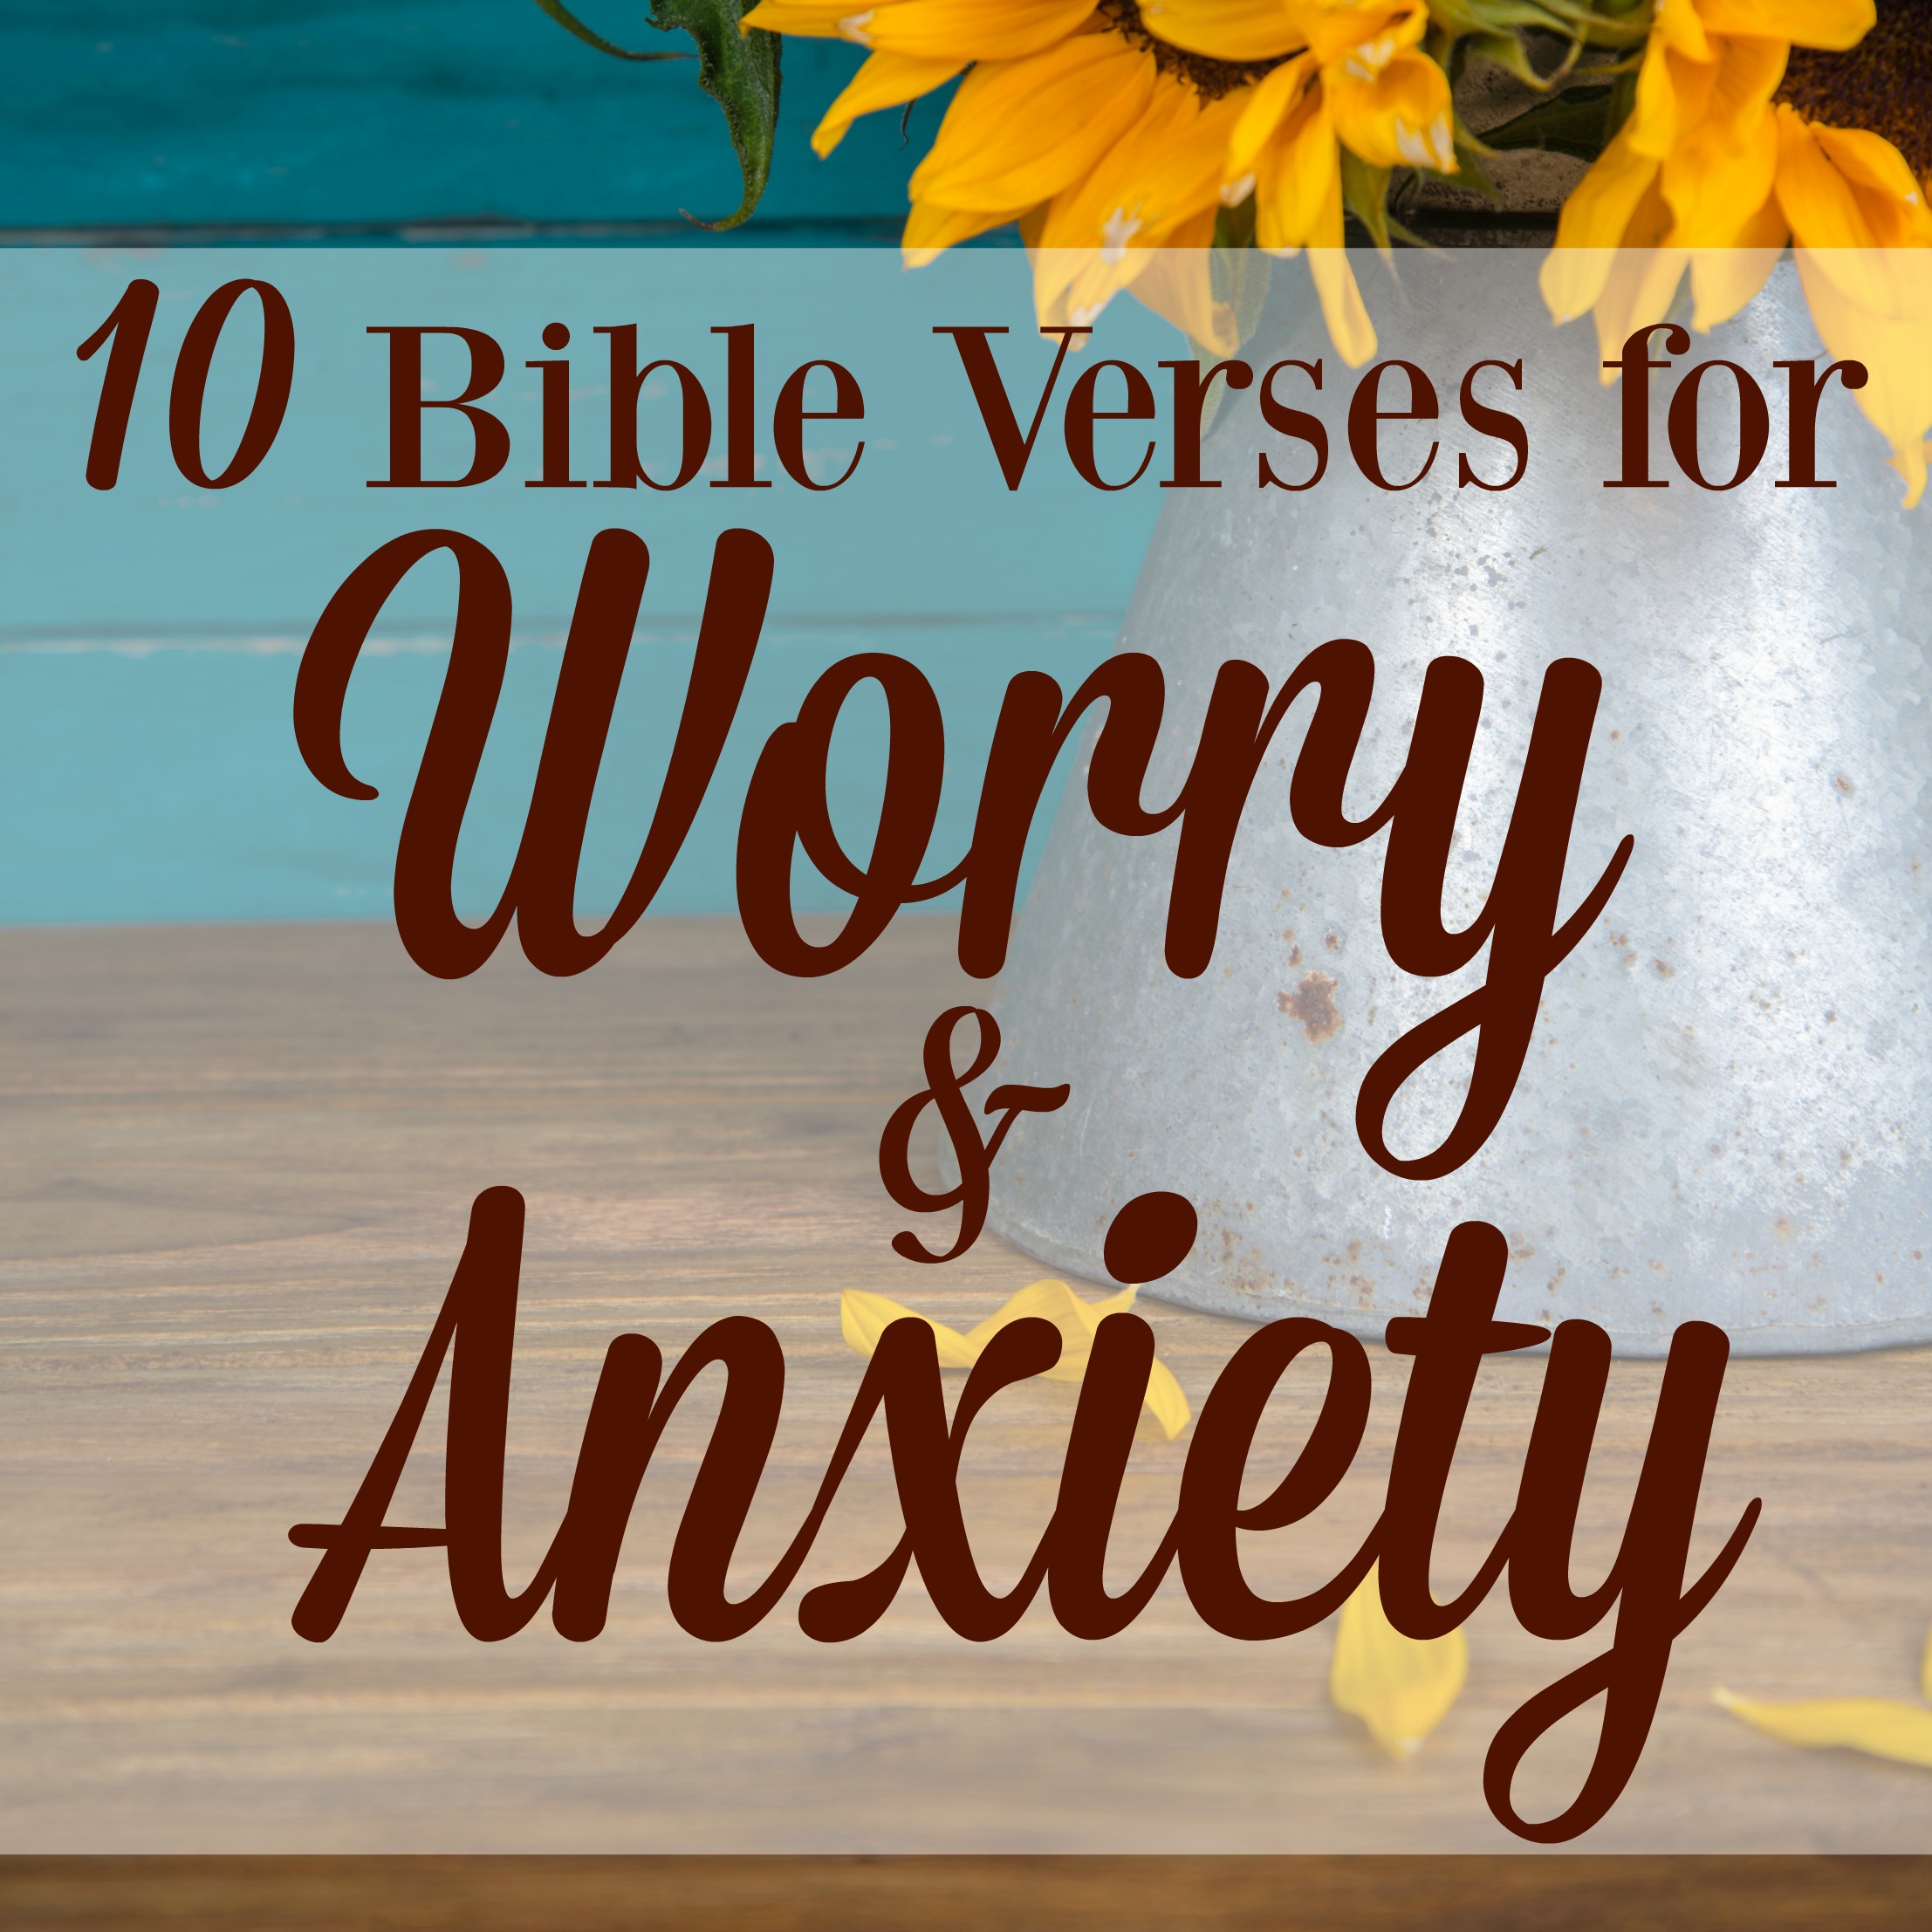 10 Bible Verses for Worry and Anxiety